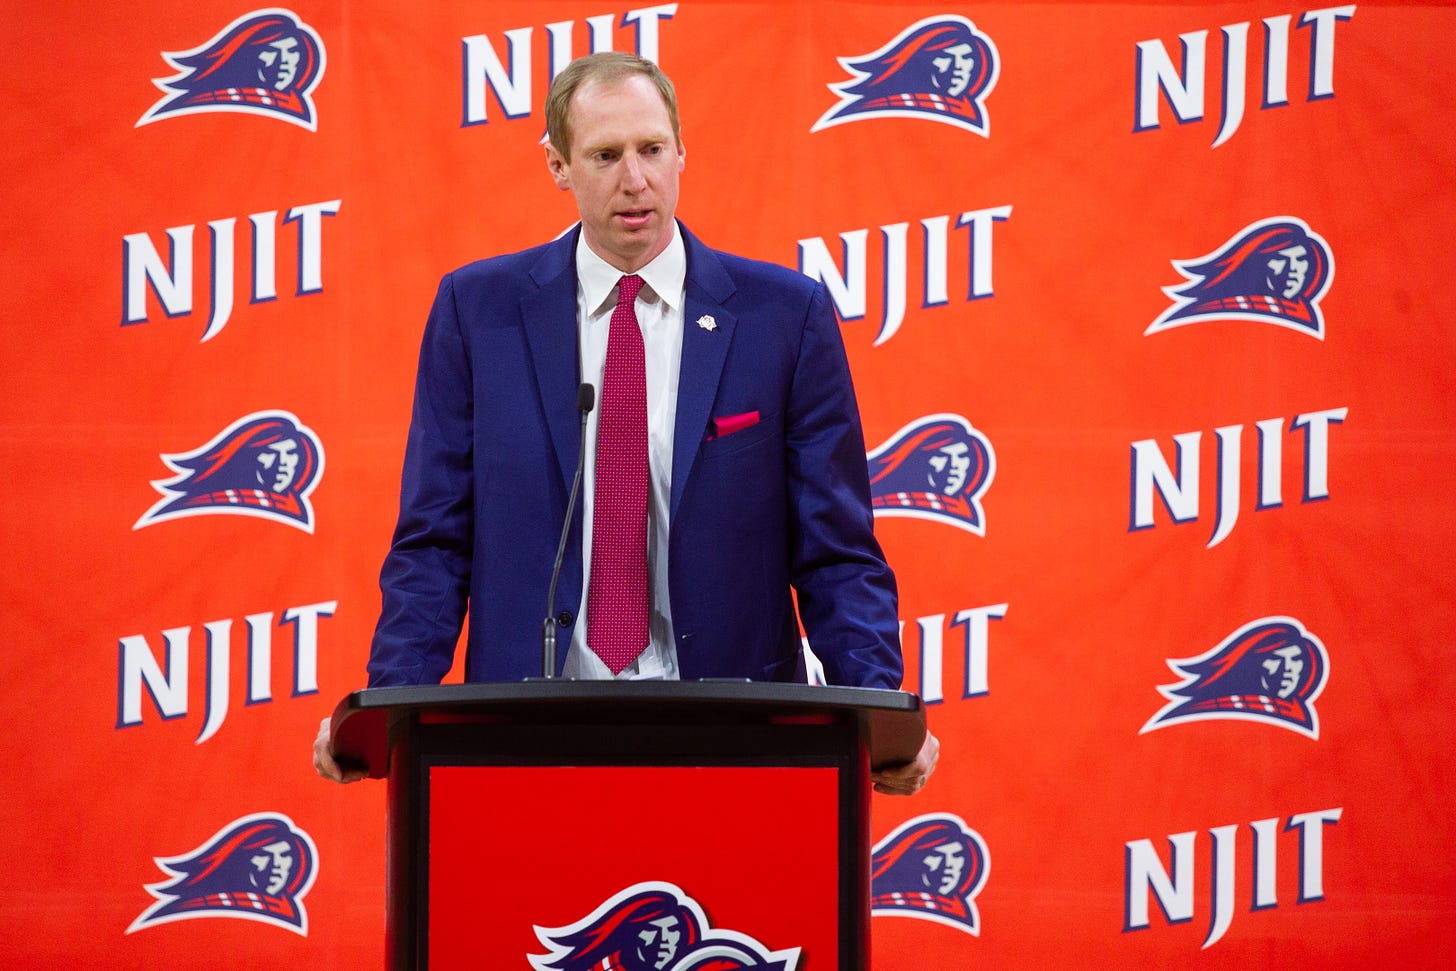 Former Seton Hall player and assistant coach Grant Billmeier is introduced as the head coach of NJIT on April 20, 2023. (Photo by Matt Kipp / courtesy of NJIT athletics)